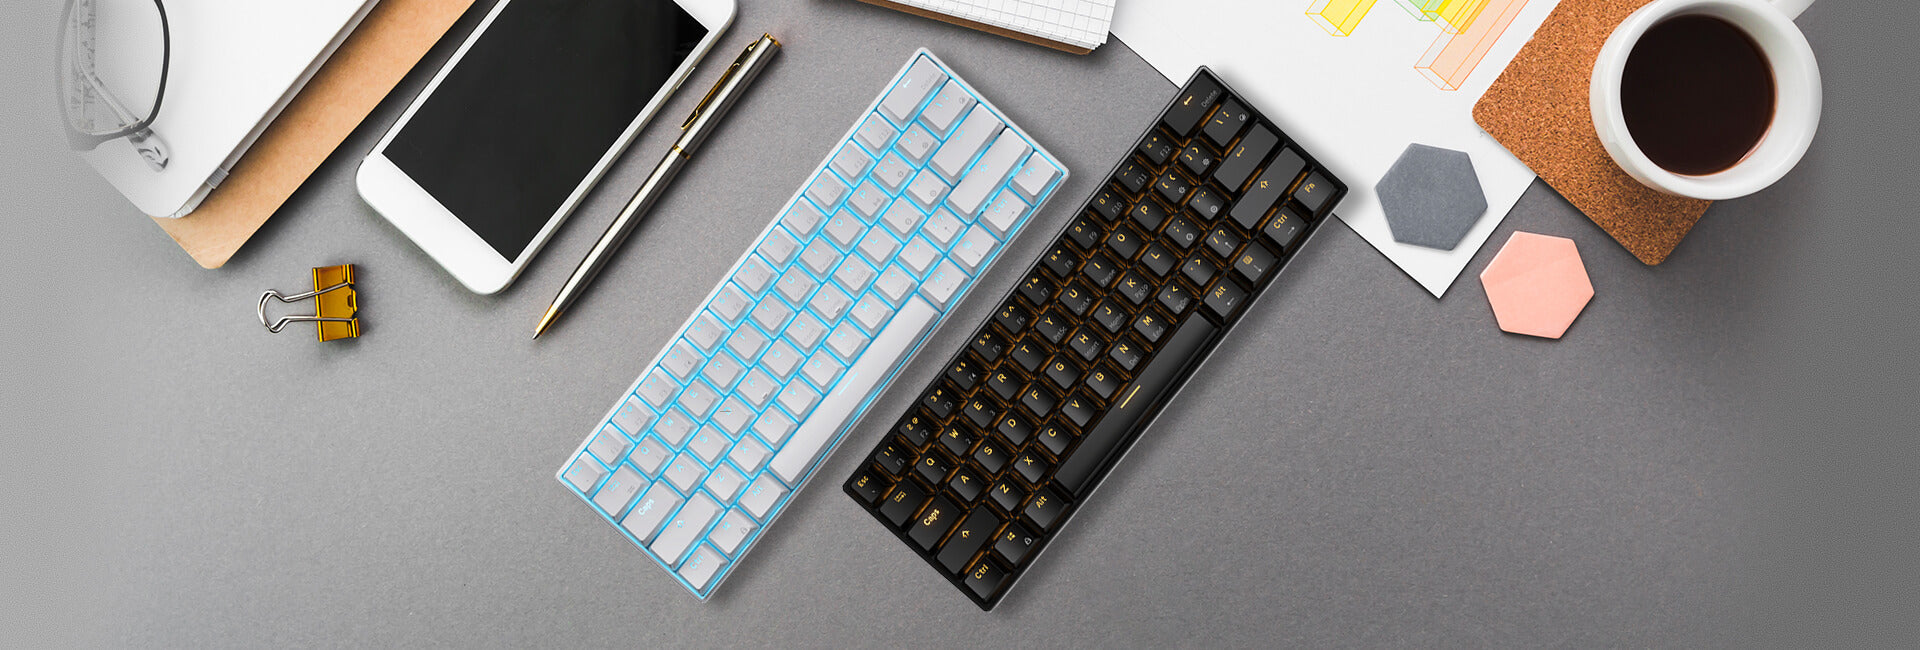 RK ROYAL KLUDGE RK61 60% Mechanical Keyboard with Coiled Cable,  2.4Ghz/Bluetooth/Wired, Wireless Bluetooth Mini Keyboard 61 Keys, RGB Hot  Swappable